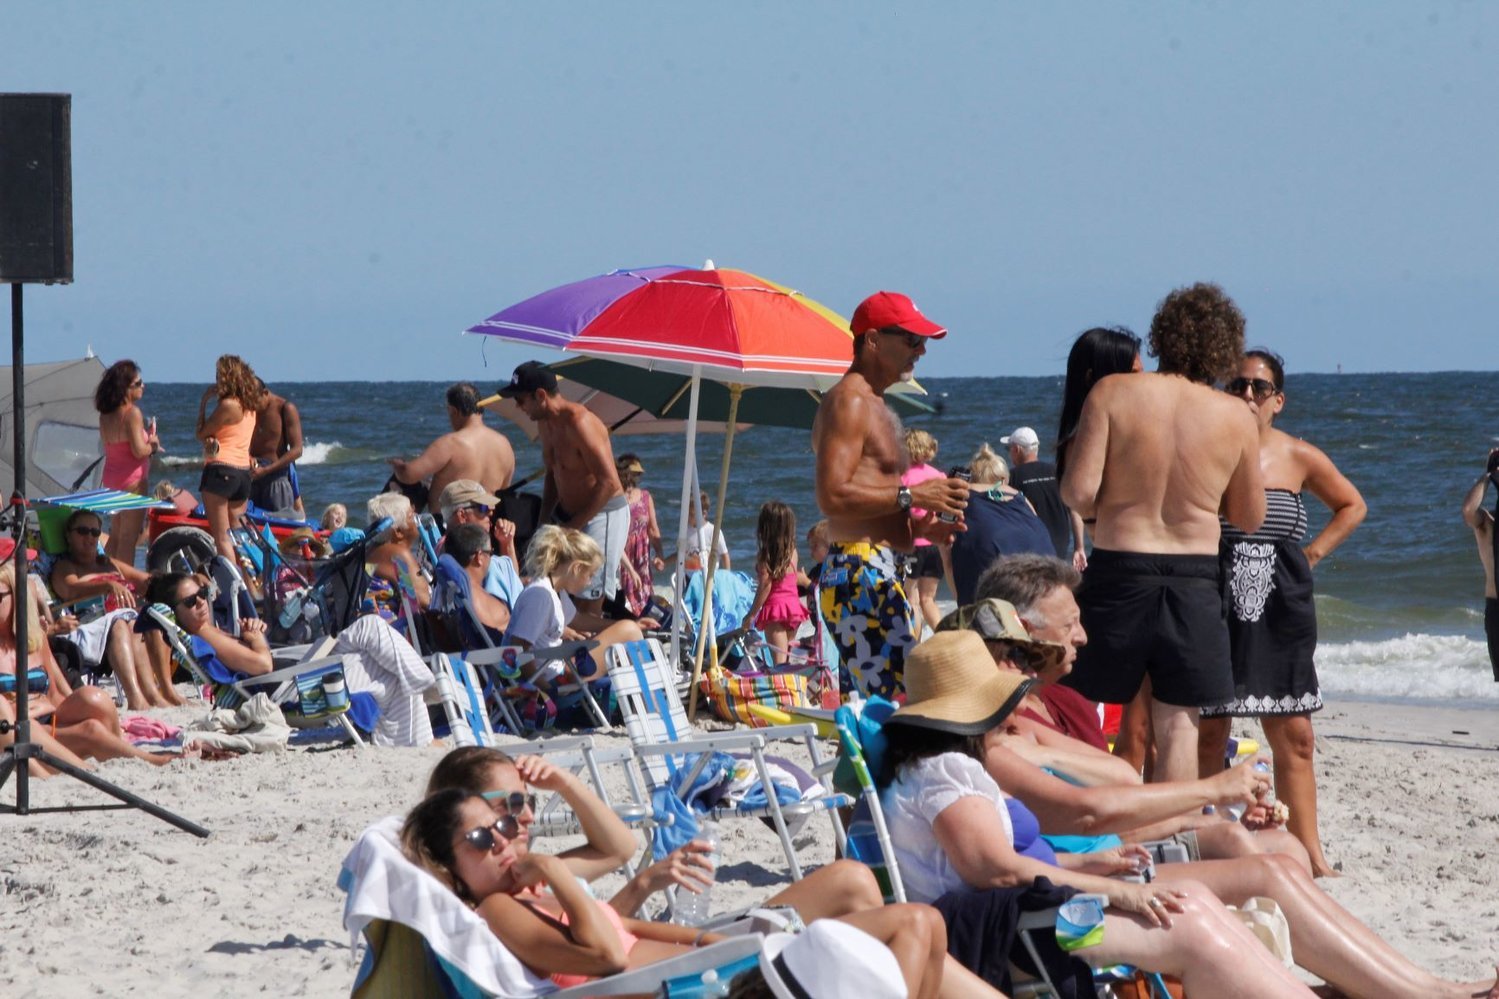 State parks like Long Beach on Long Island will be open Memorial Day weekend — but getting there as a New York City resident might not be so easy.